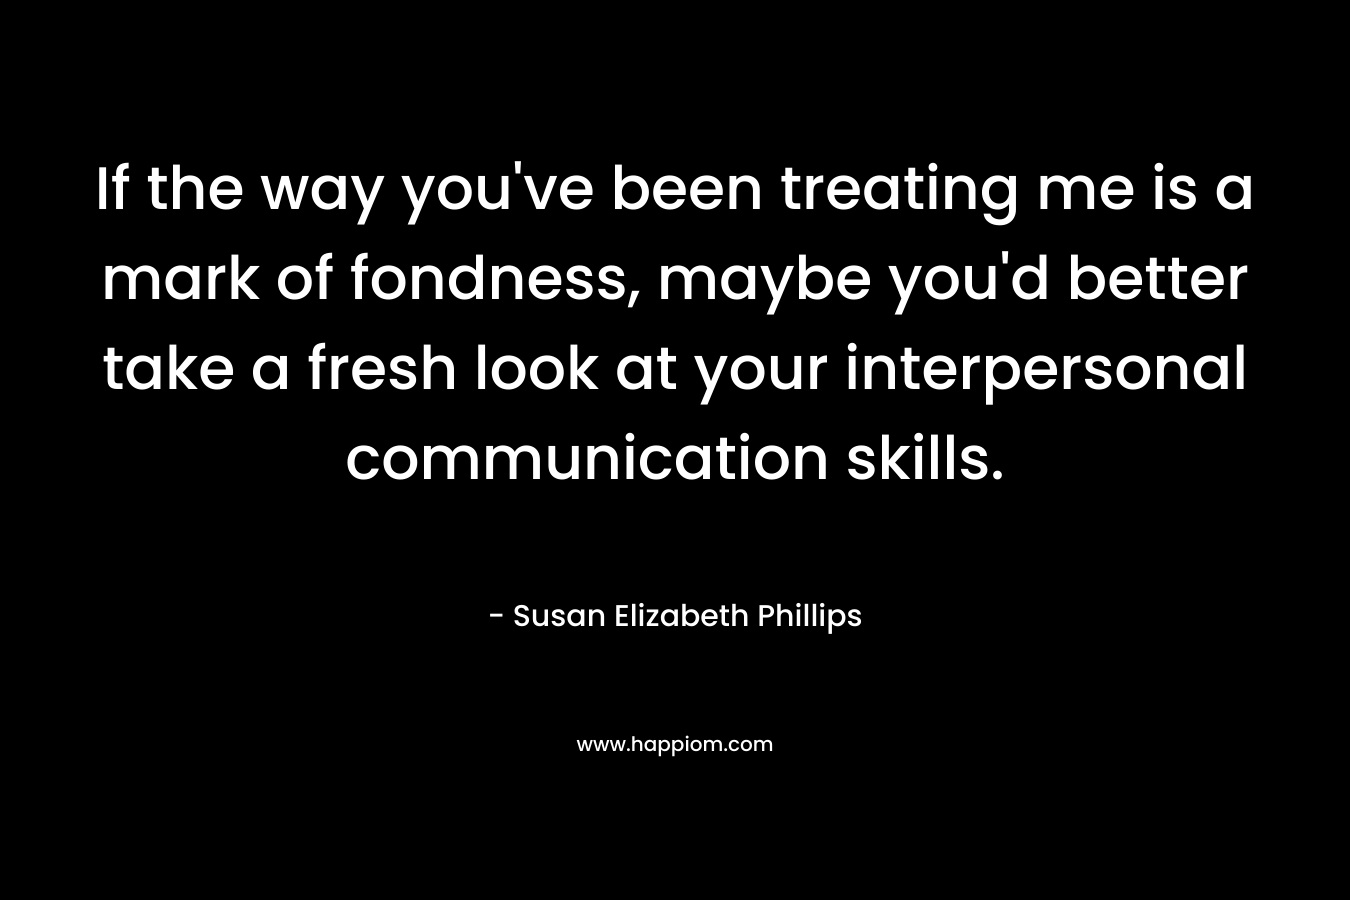 If the way you've been treating me is a mark of fondness, maybe you'd better take a fresh look at your interpersonal communication skills.